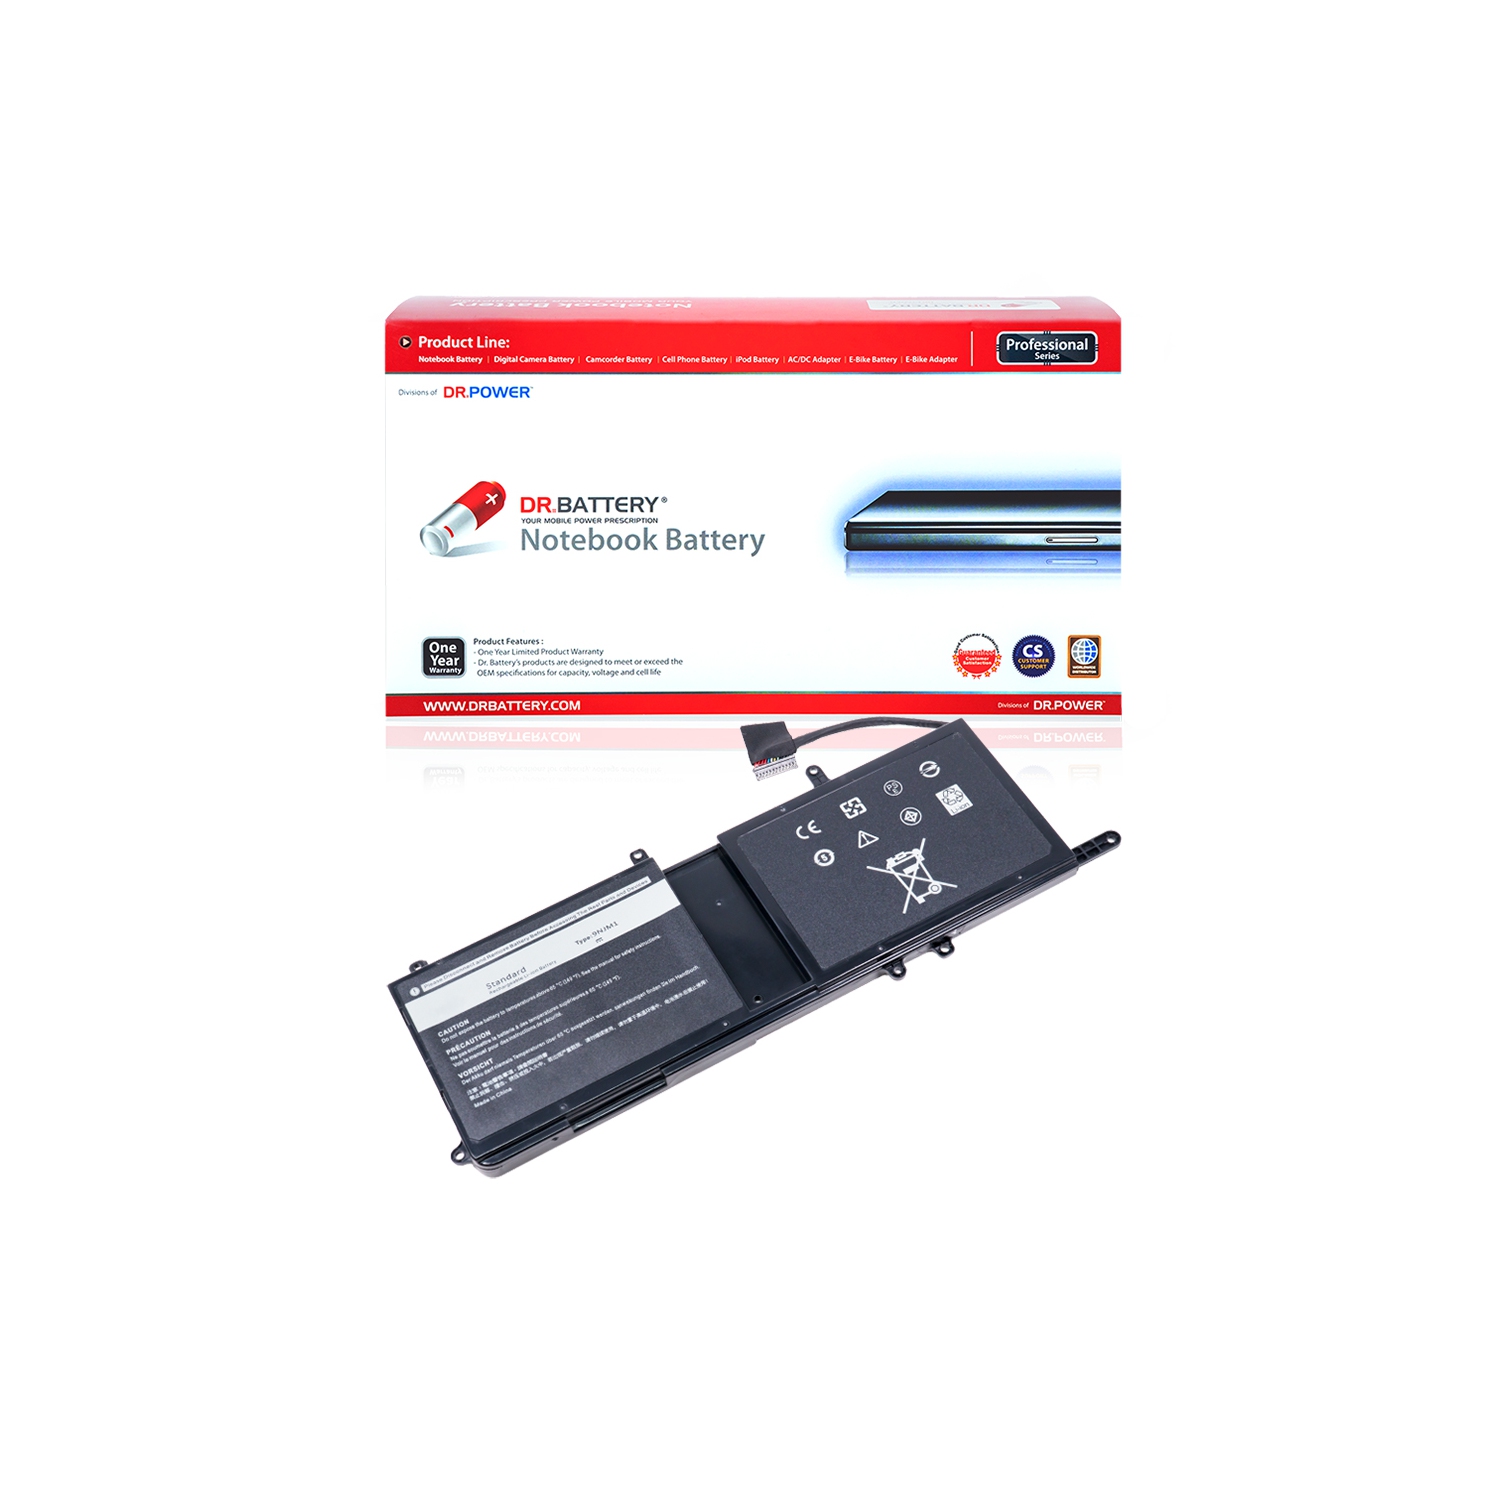 DR. BATTERY - Replacement for Dell Alienware 15 17 ALW17C-D3748S / 17 ALW17C-D3749B / 17 ALW17C-D3749PB / P69F001 / 01D82